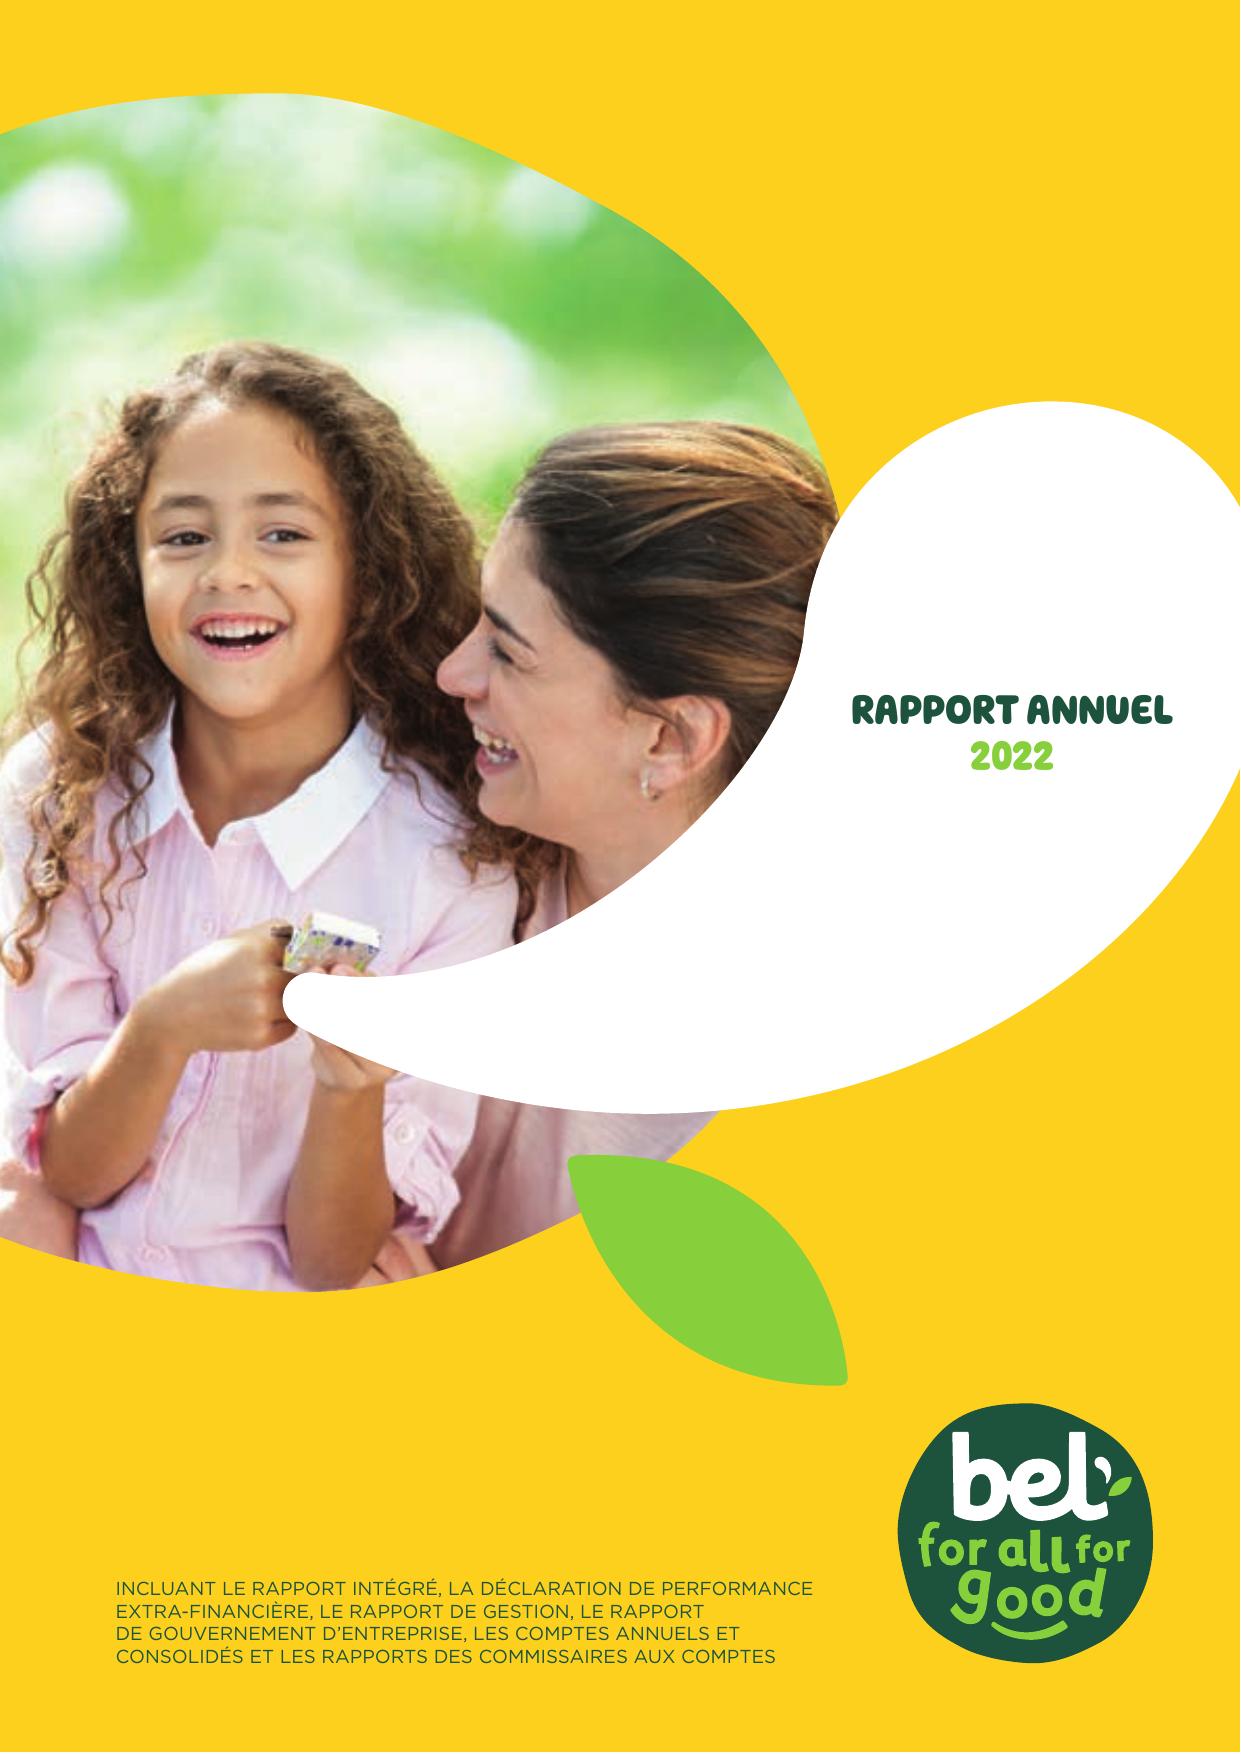 GROUPE-BEL 2023 Annual Report